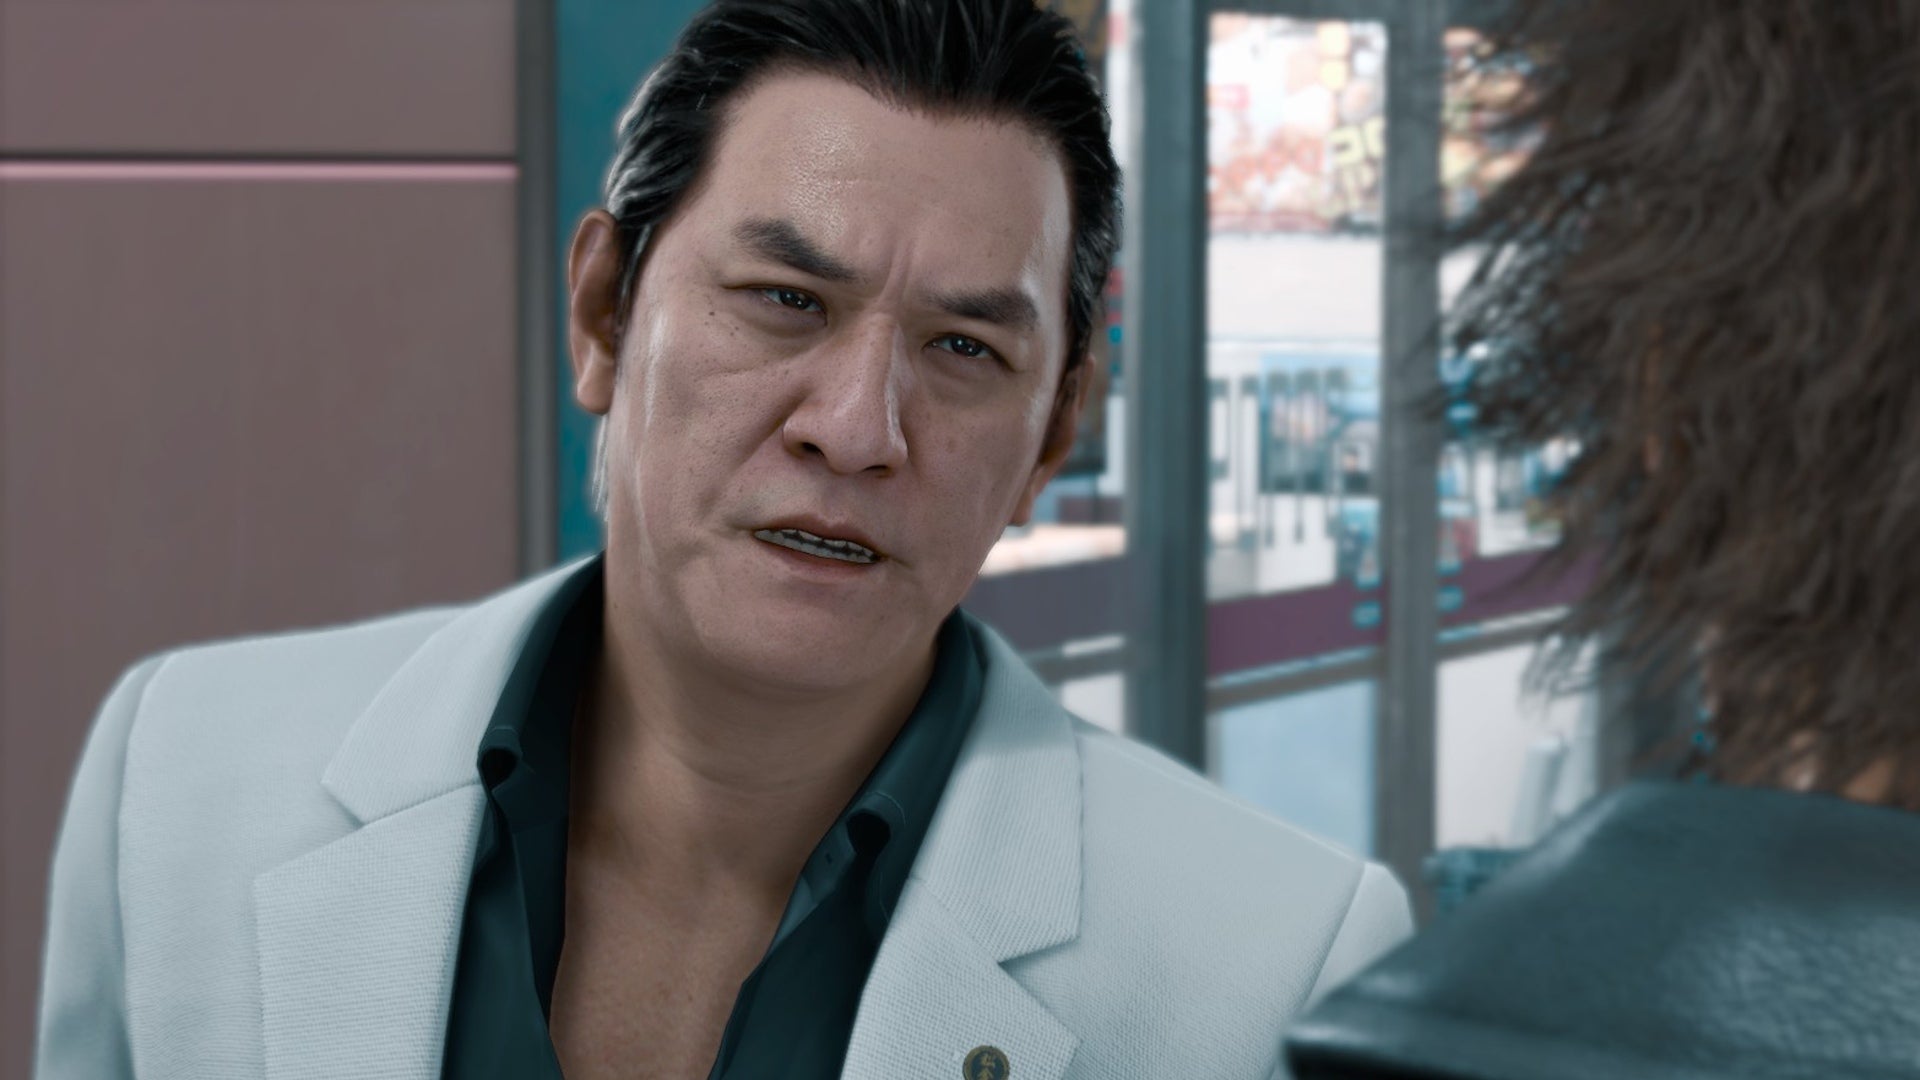 Cut actor Pierre Taki has been restored in Yakuza series spin-off Judgment thanks to a mod.